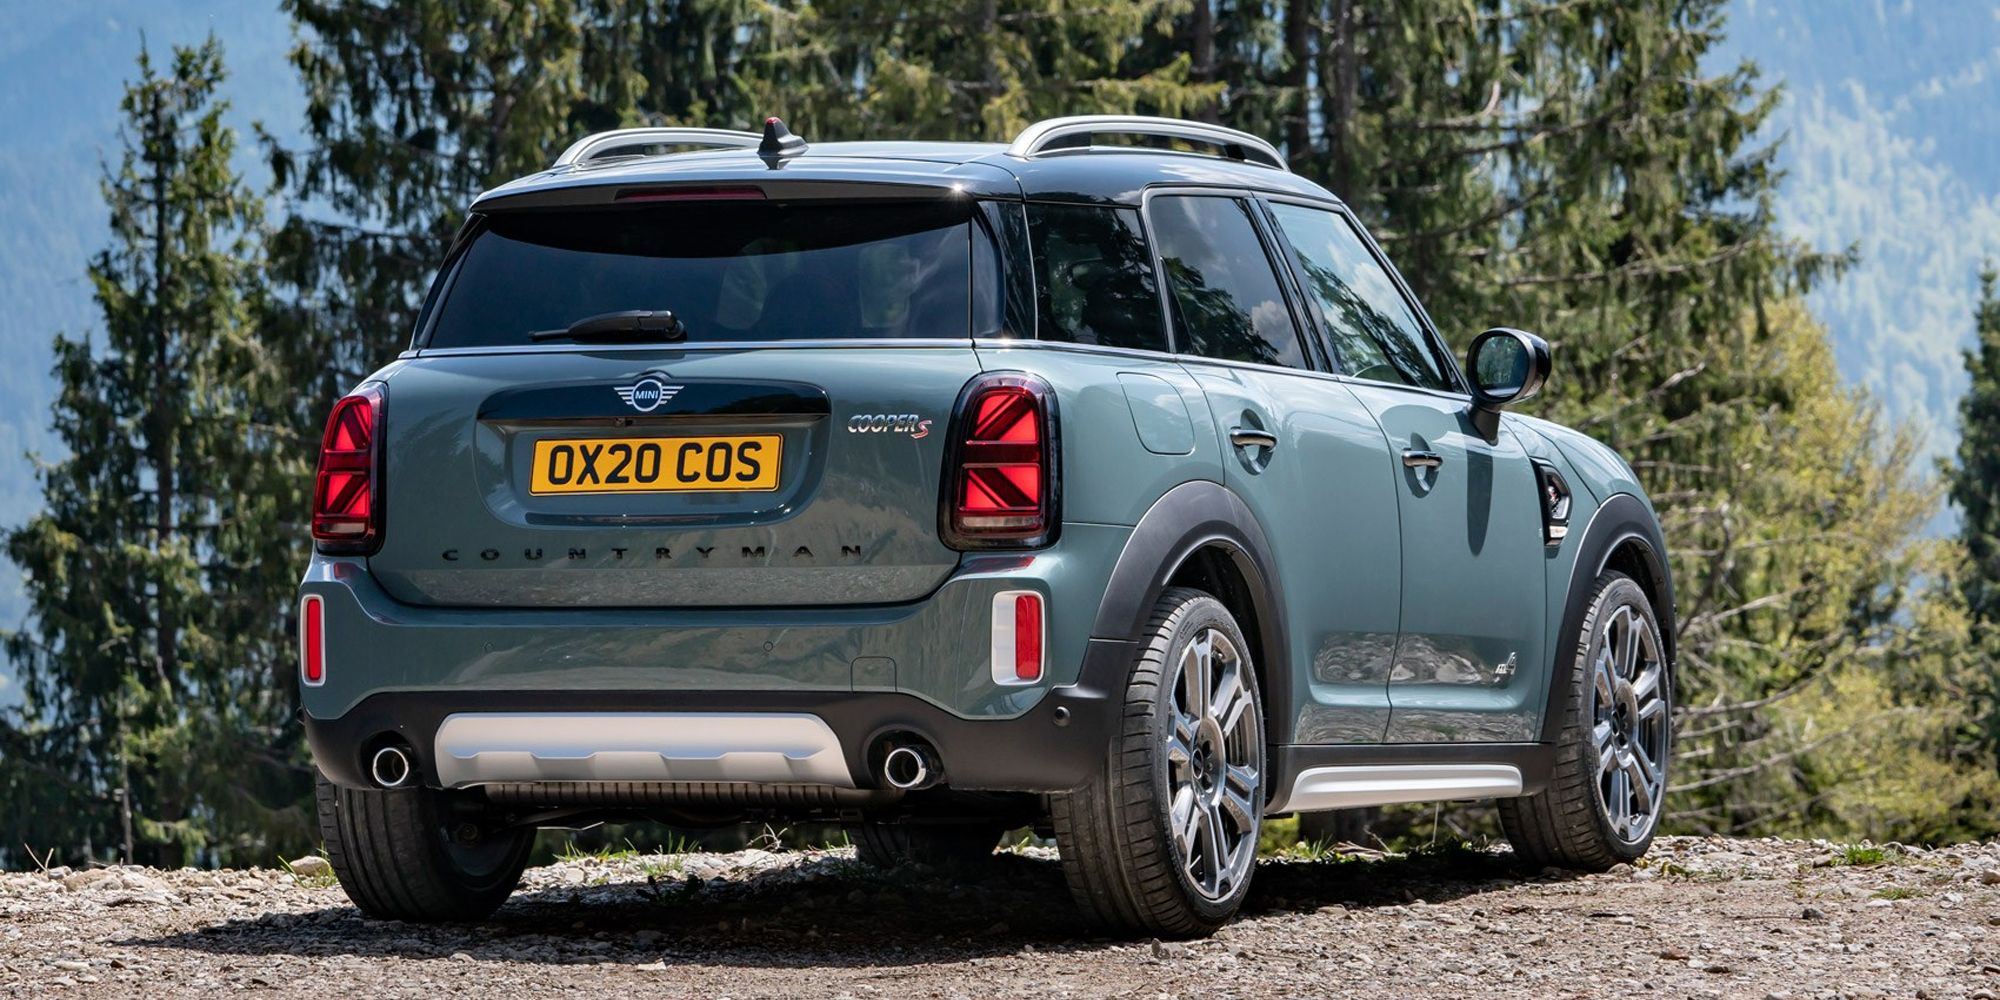 The rear of the new Countryman